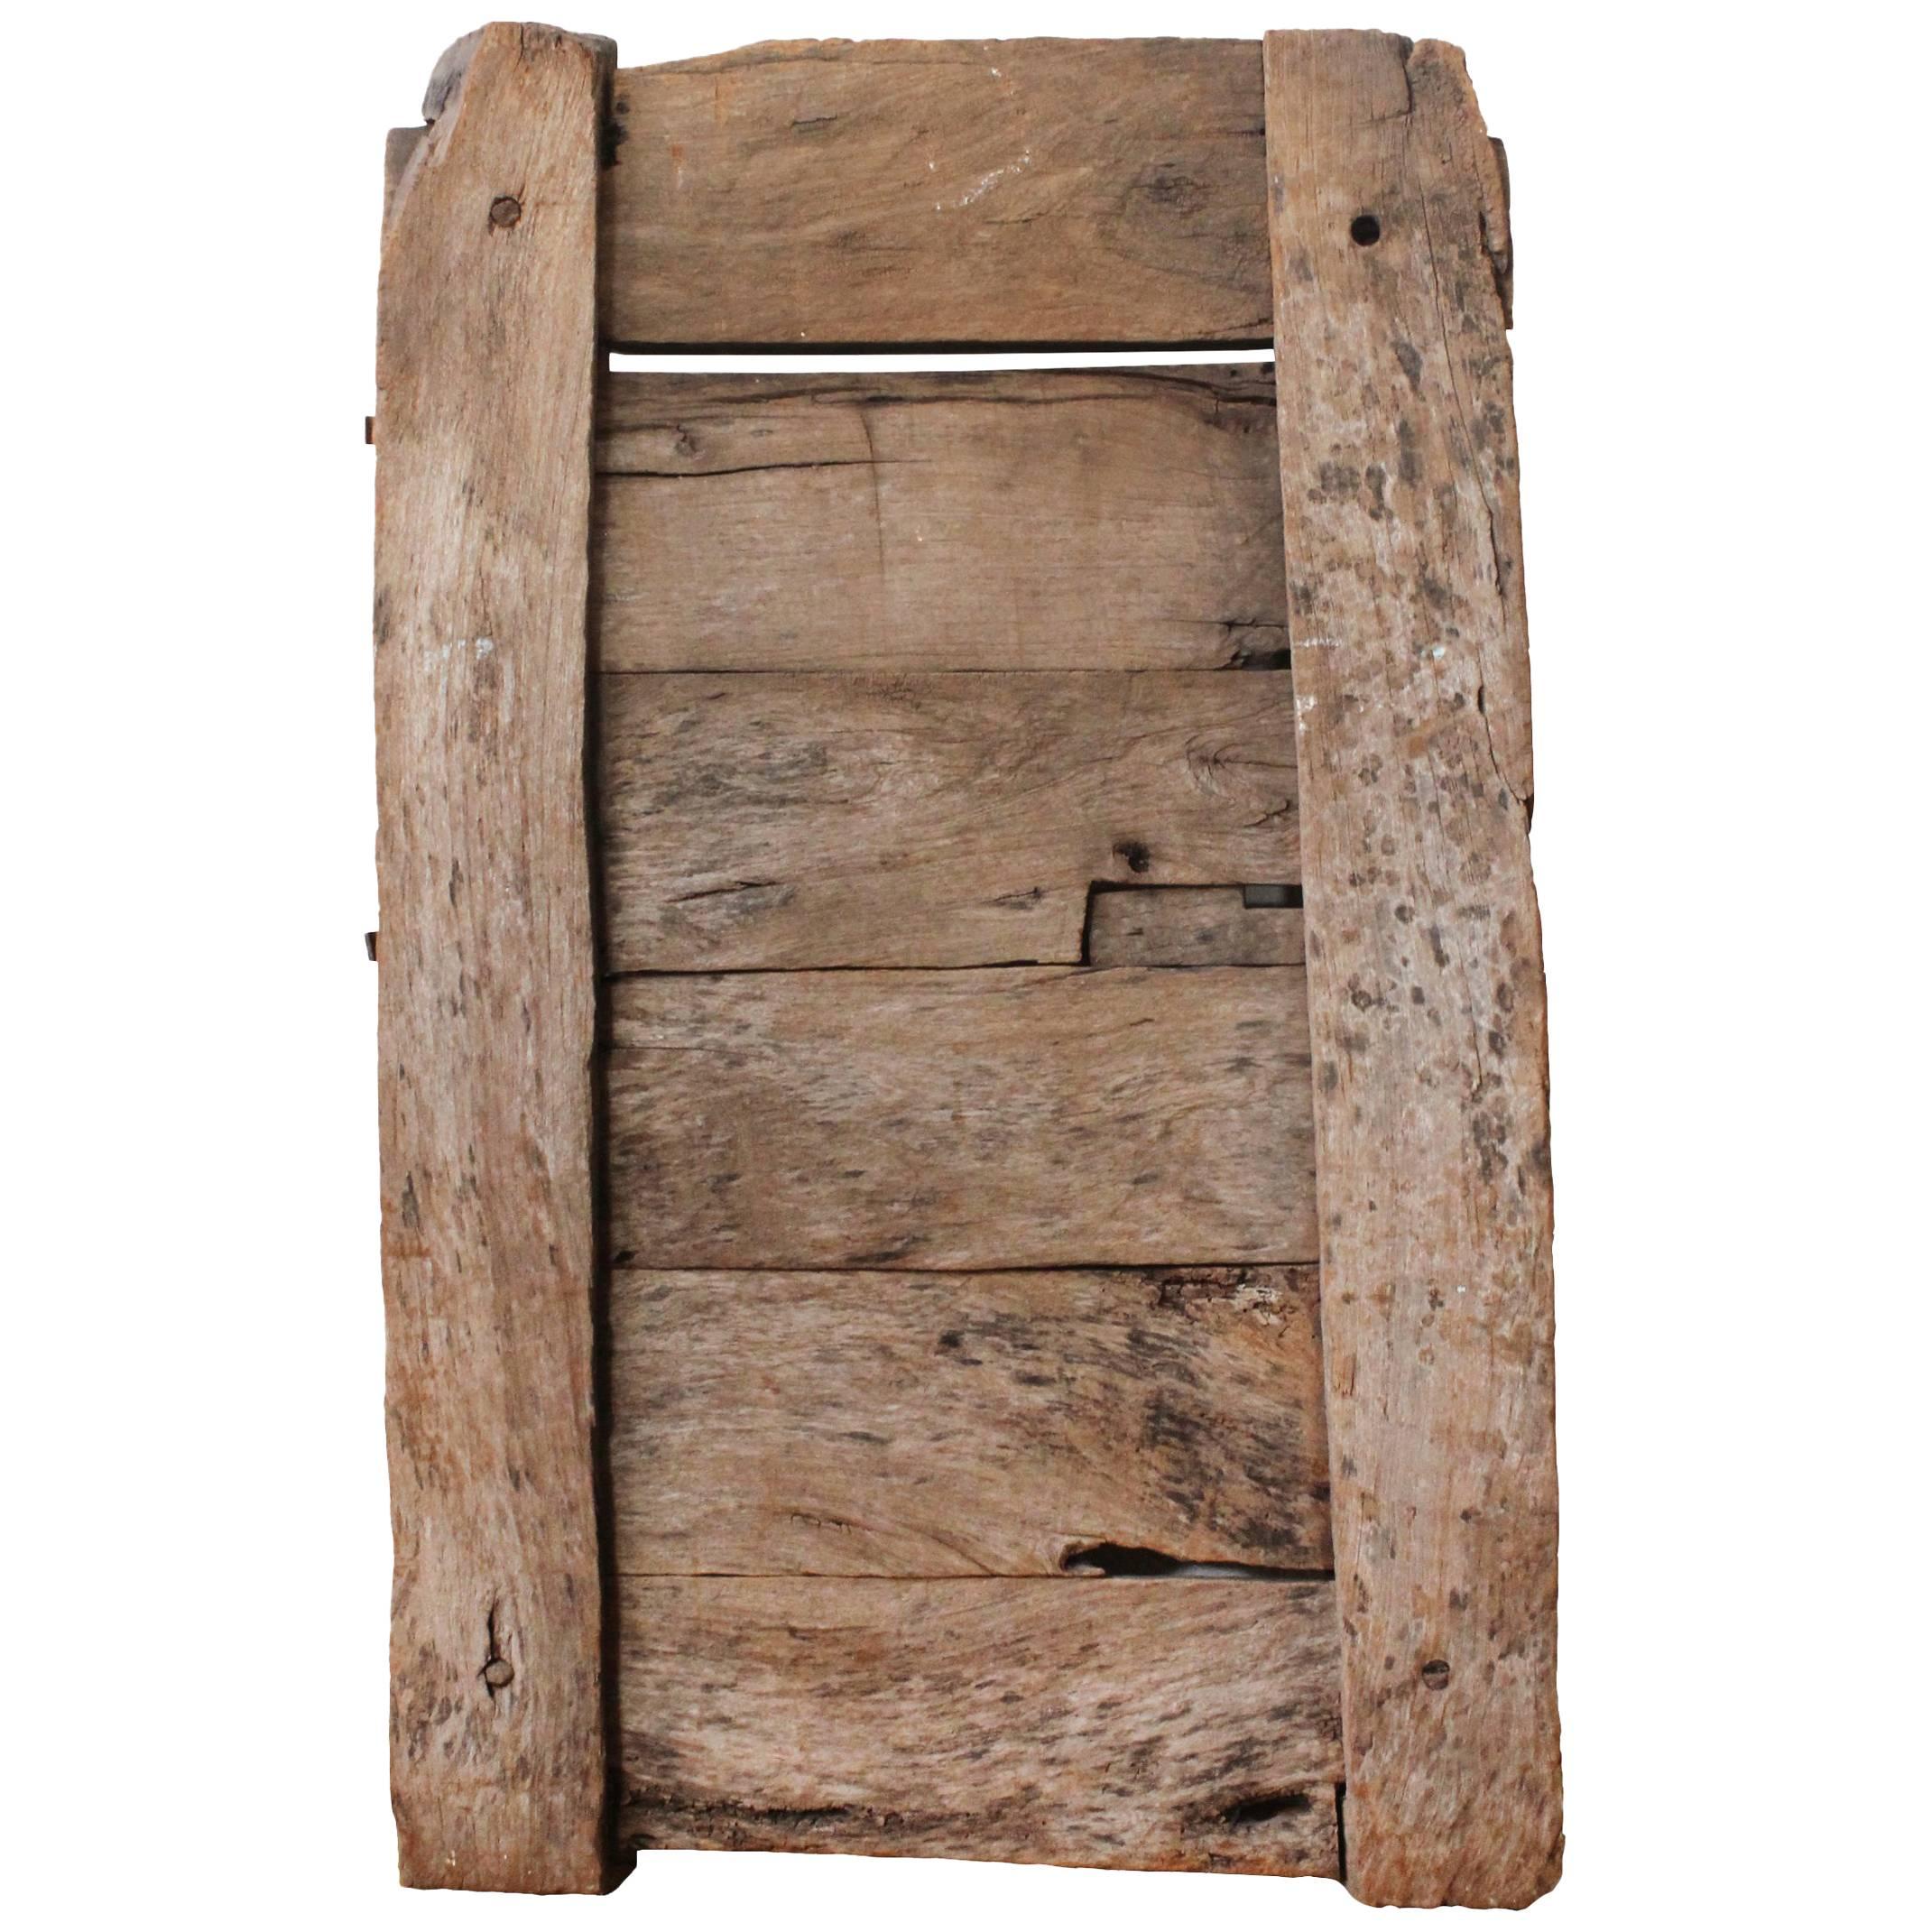 Solid Mesquite Wood "Corral" Gate, circa 1800